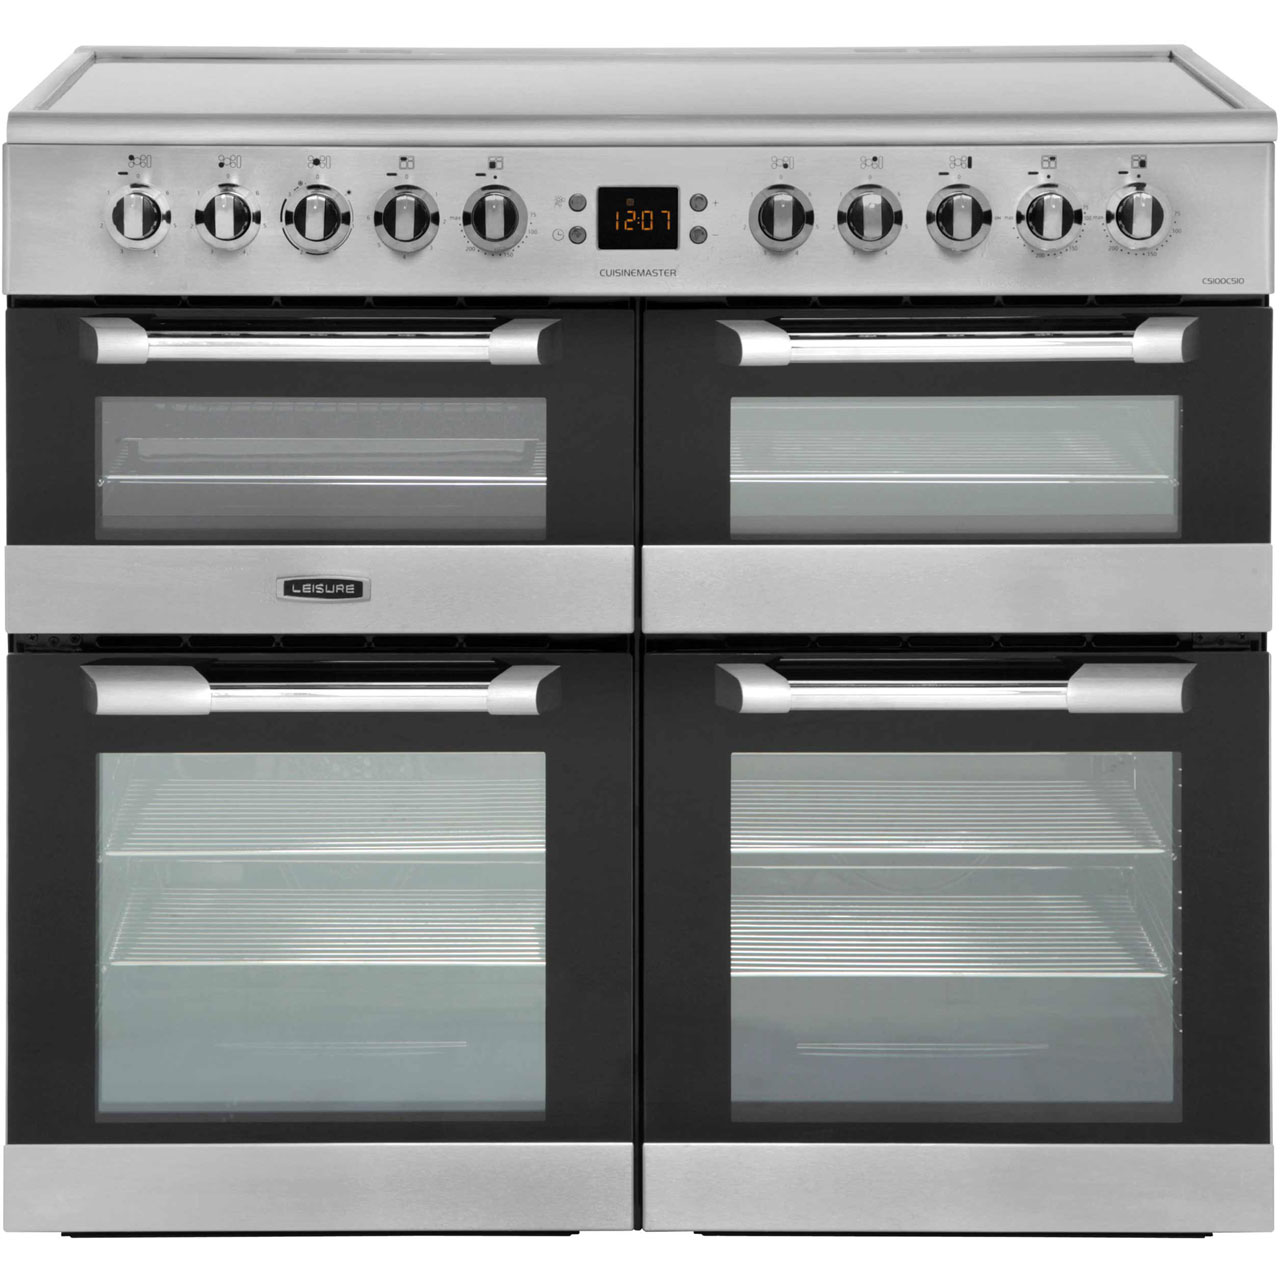 Leisure Cuisinemaster CS100C510X 100cm Electric Range Cooker with Ceramic Hob - Stainless Steel - A/A/A Rated, Stainless Steel